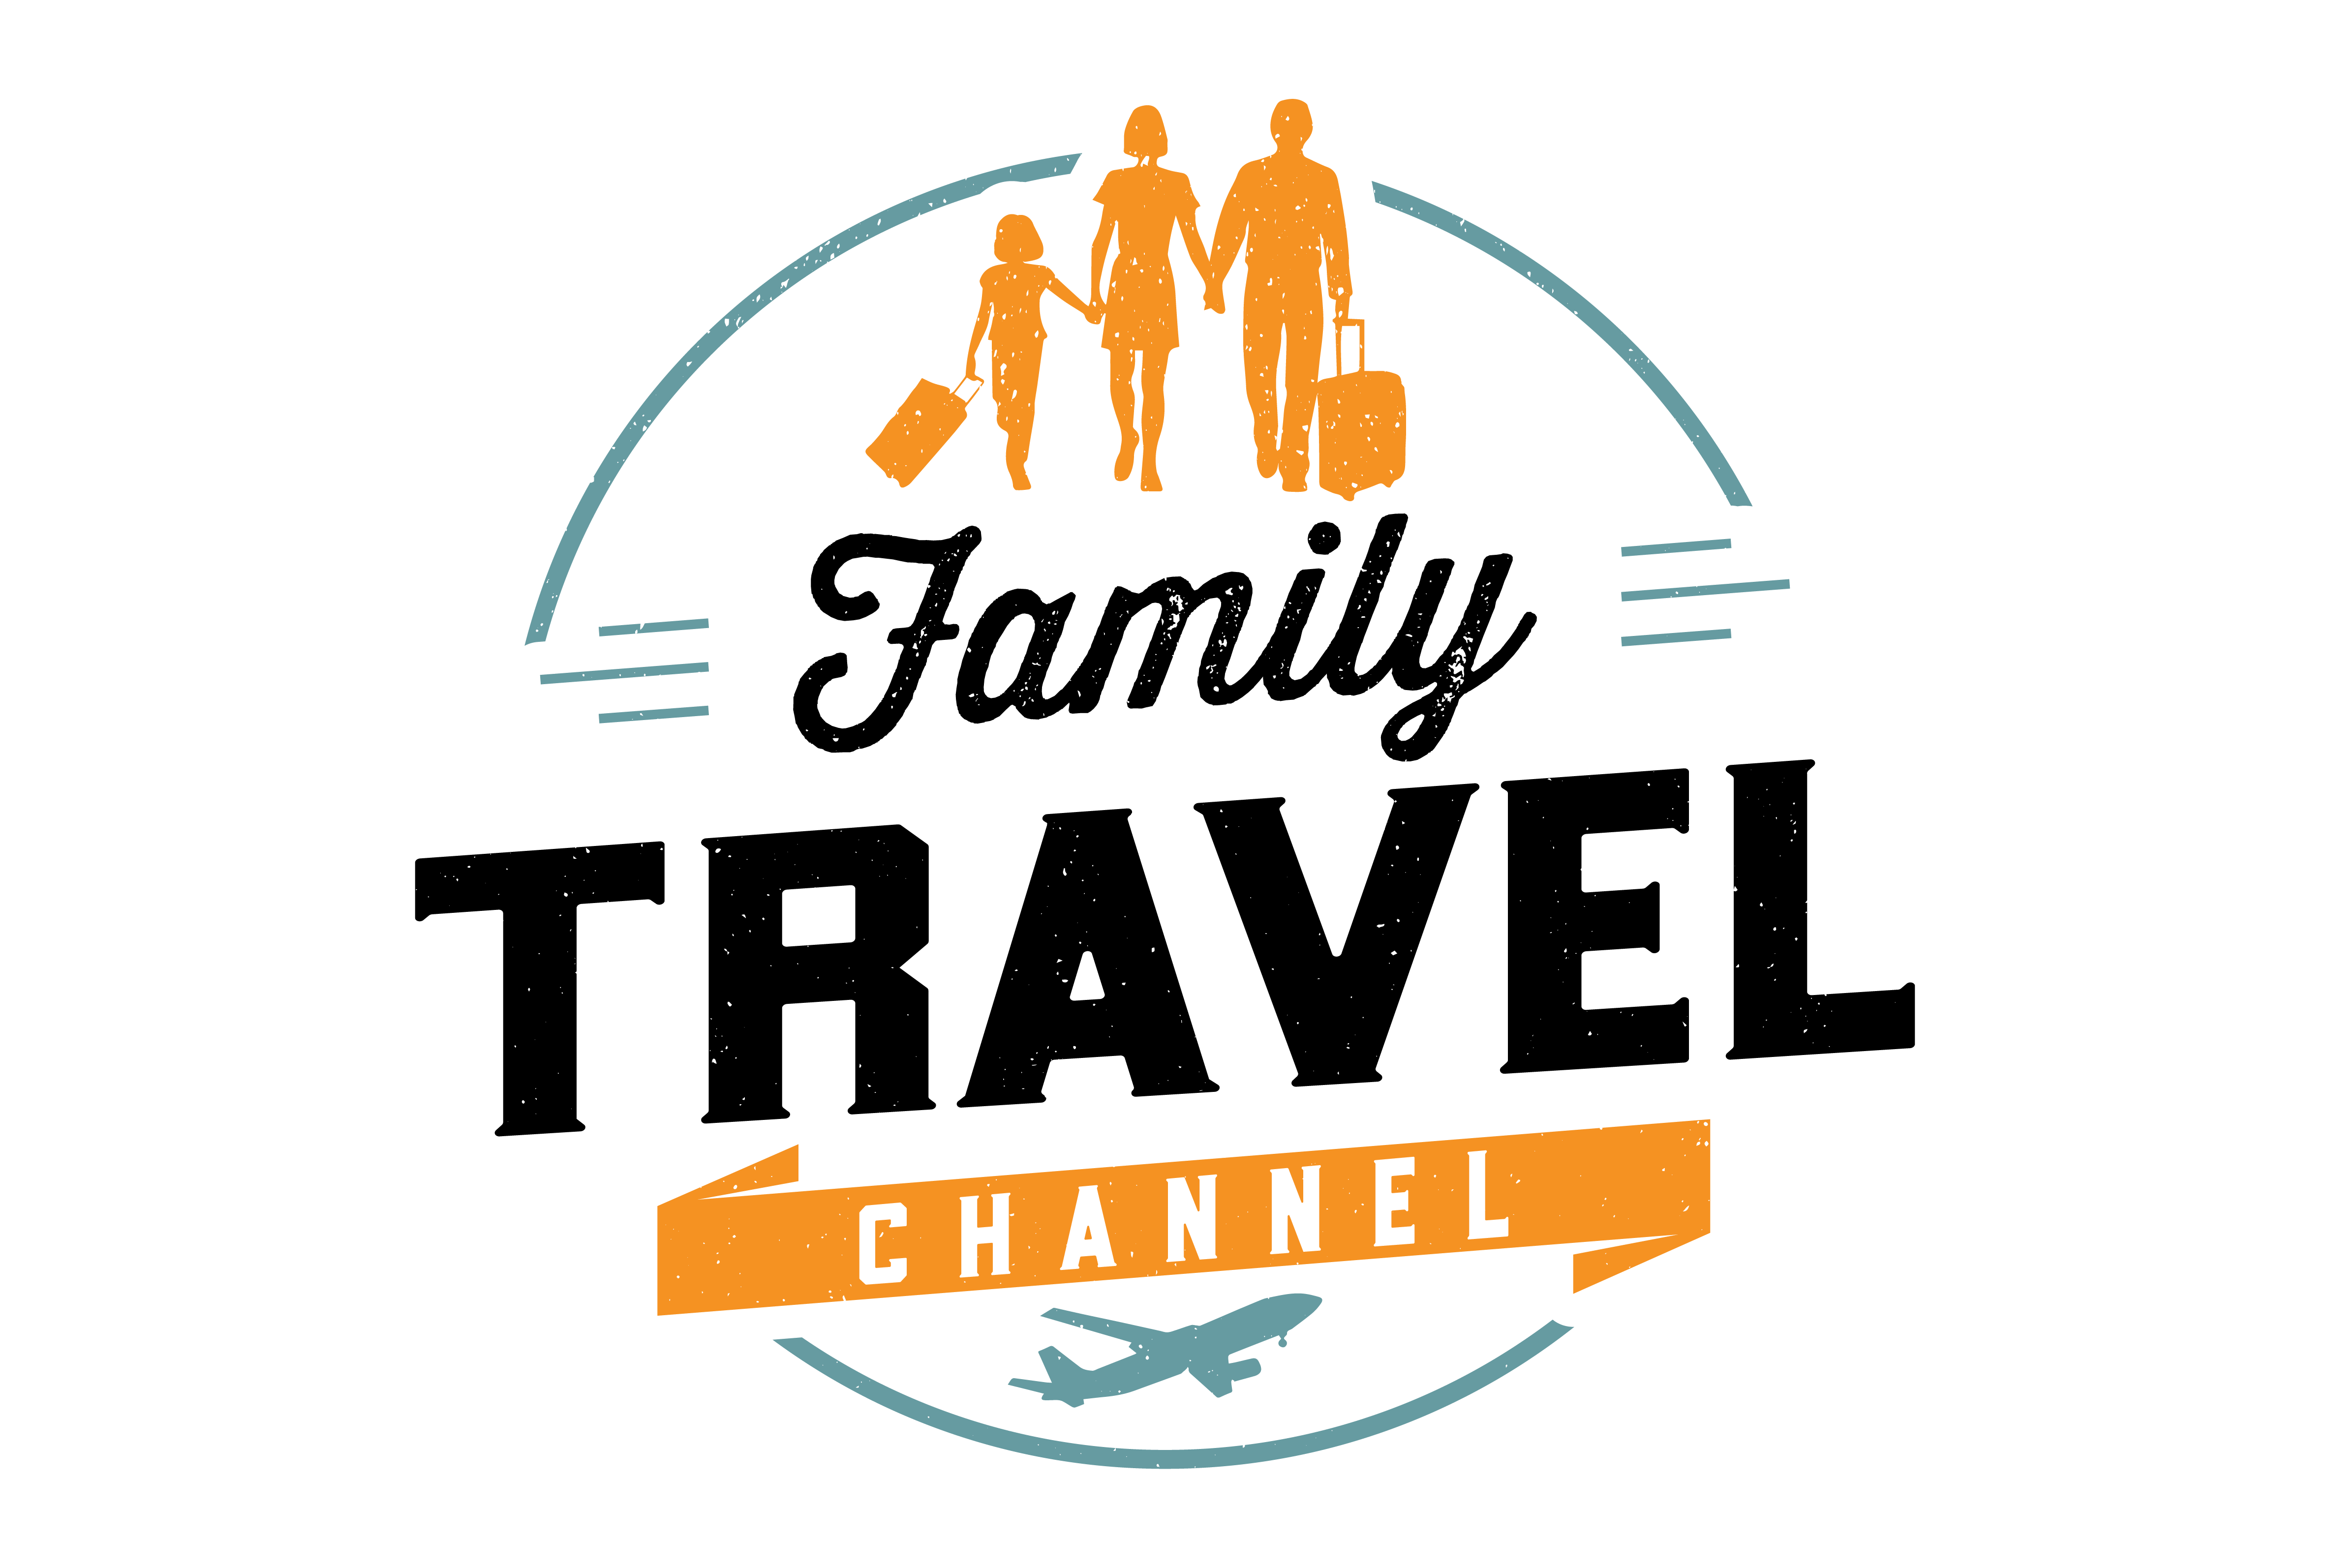 travel channel logo png